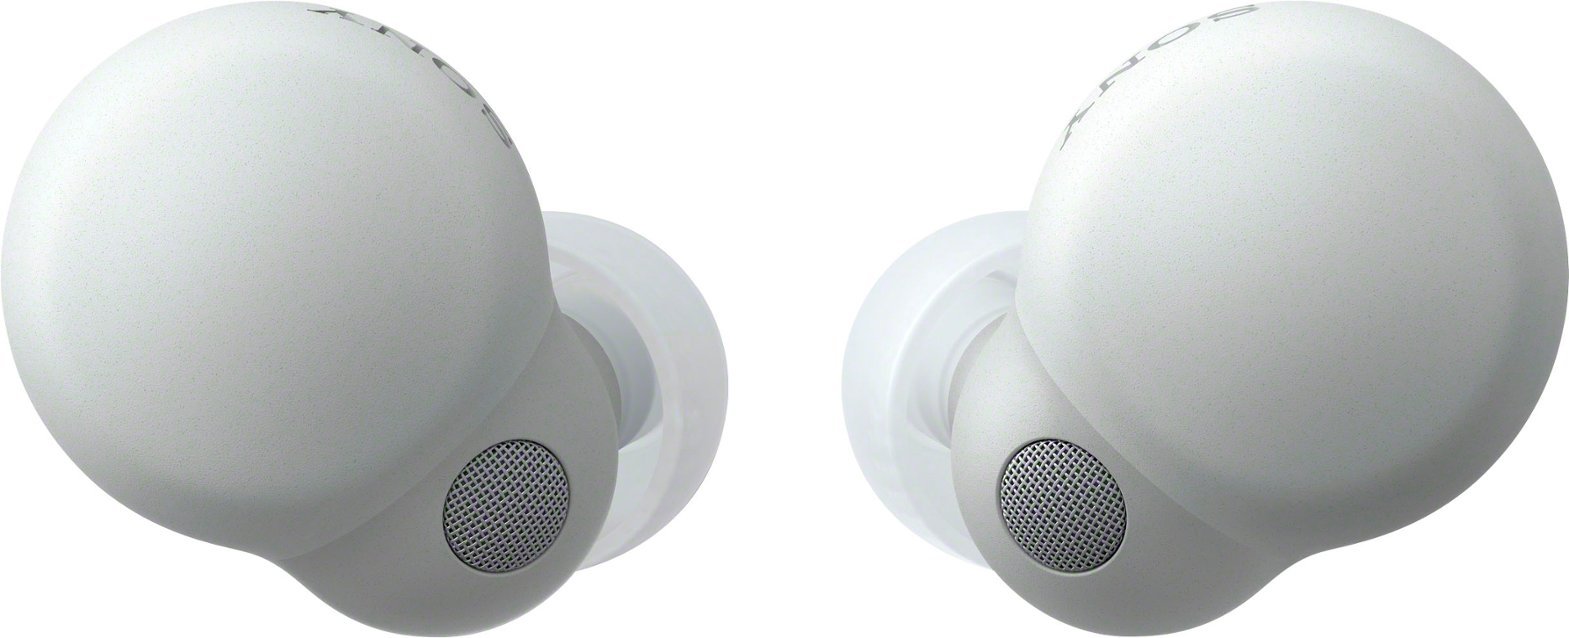 Sony - Link Buds S True Wireless Noise Canceling Earbuds - White-White